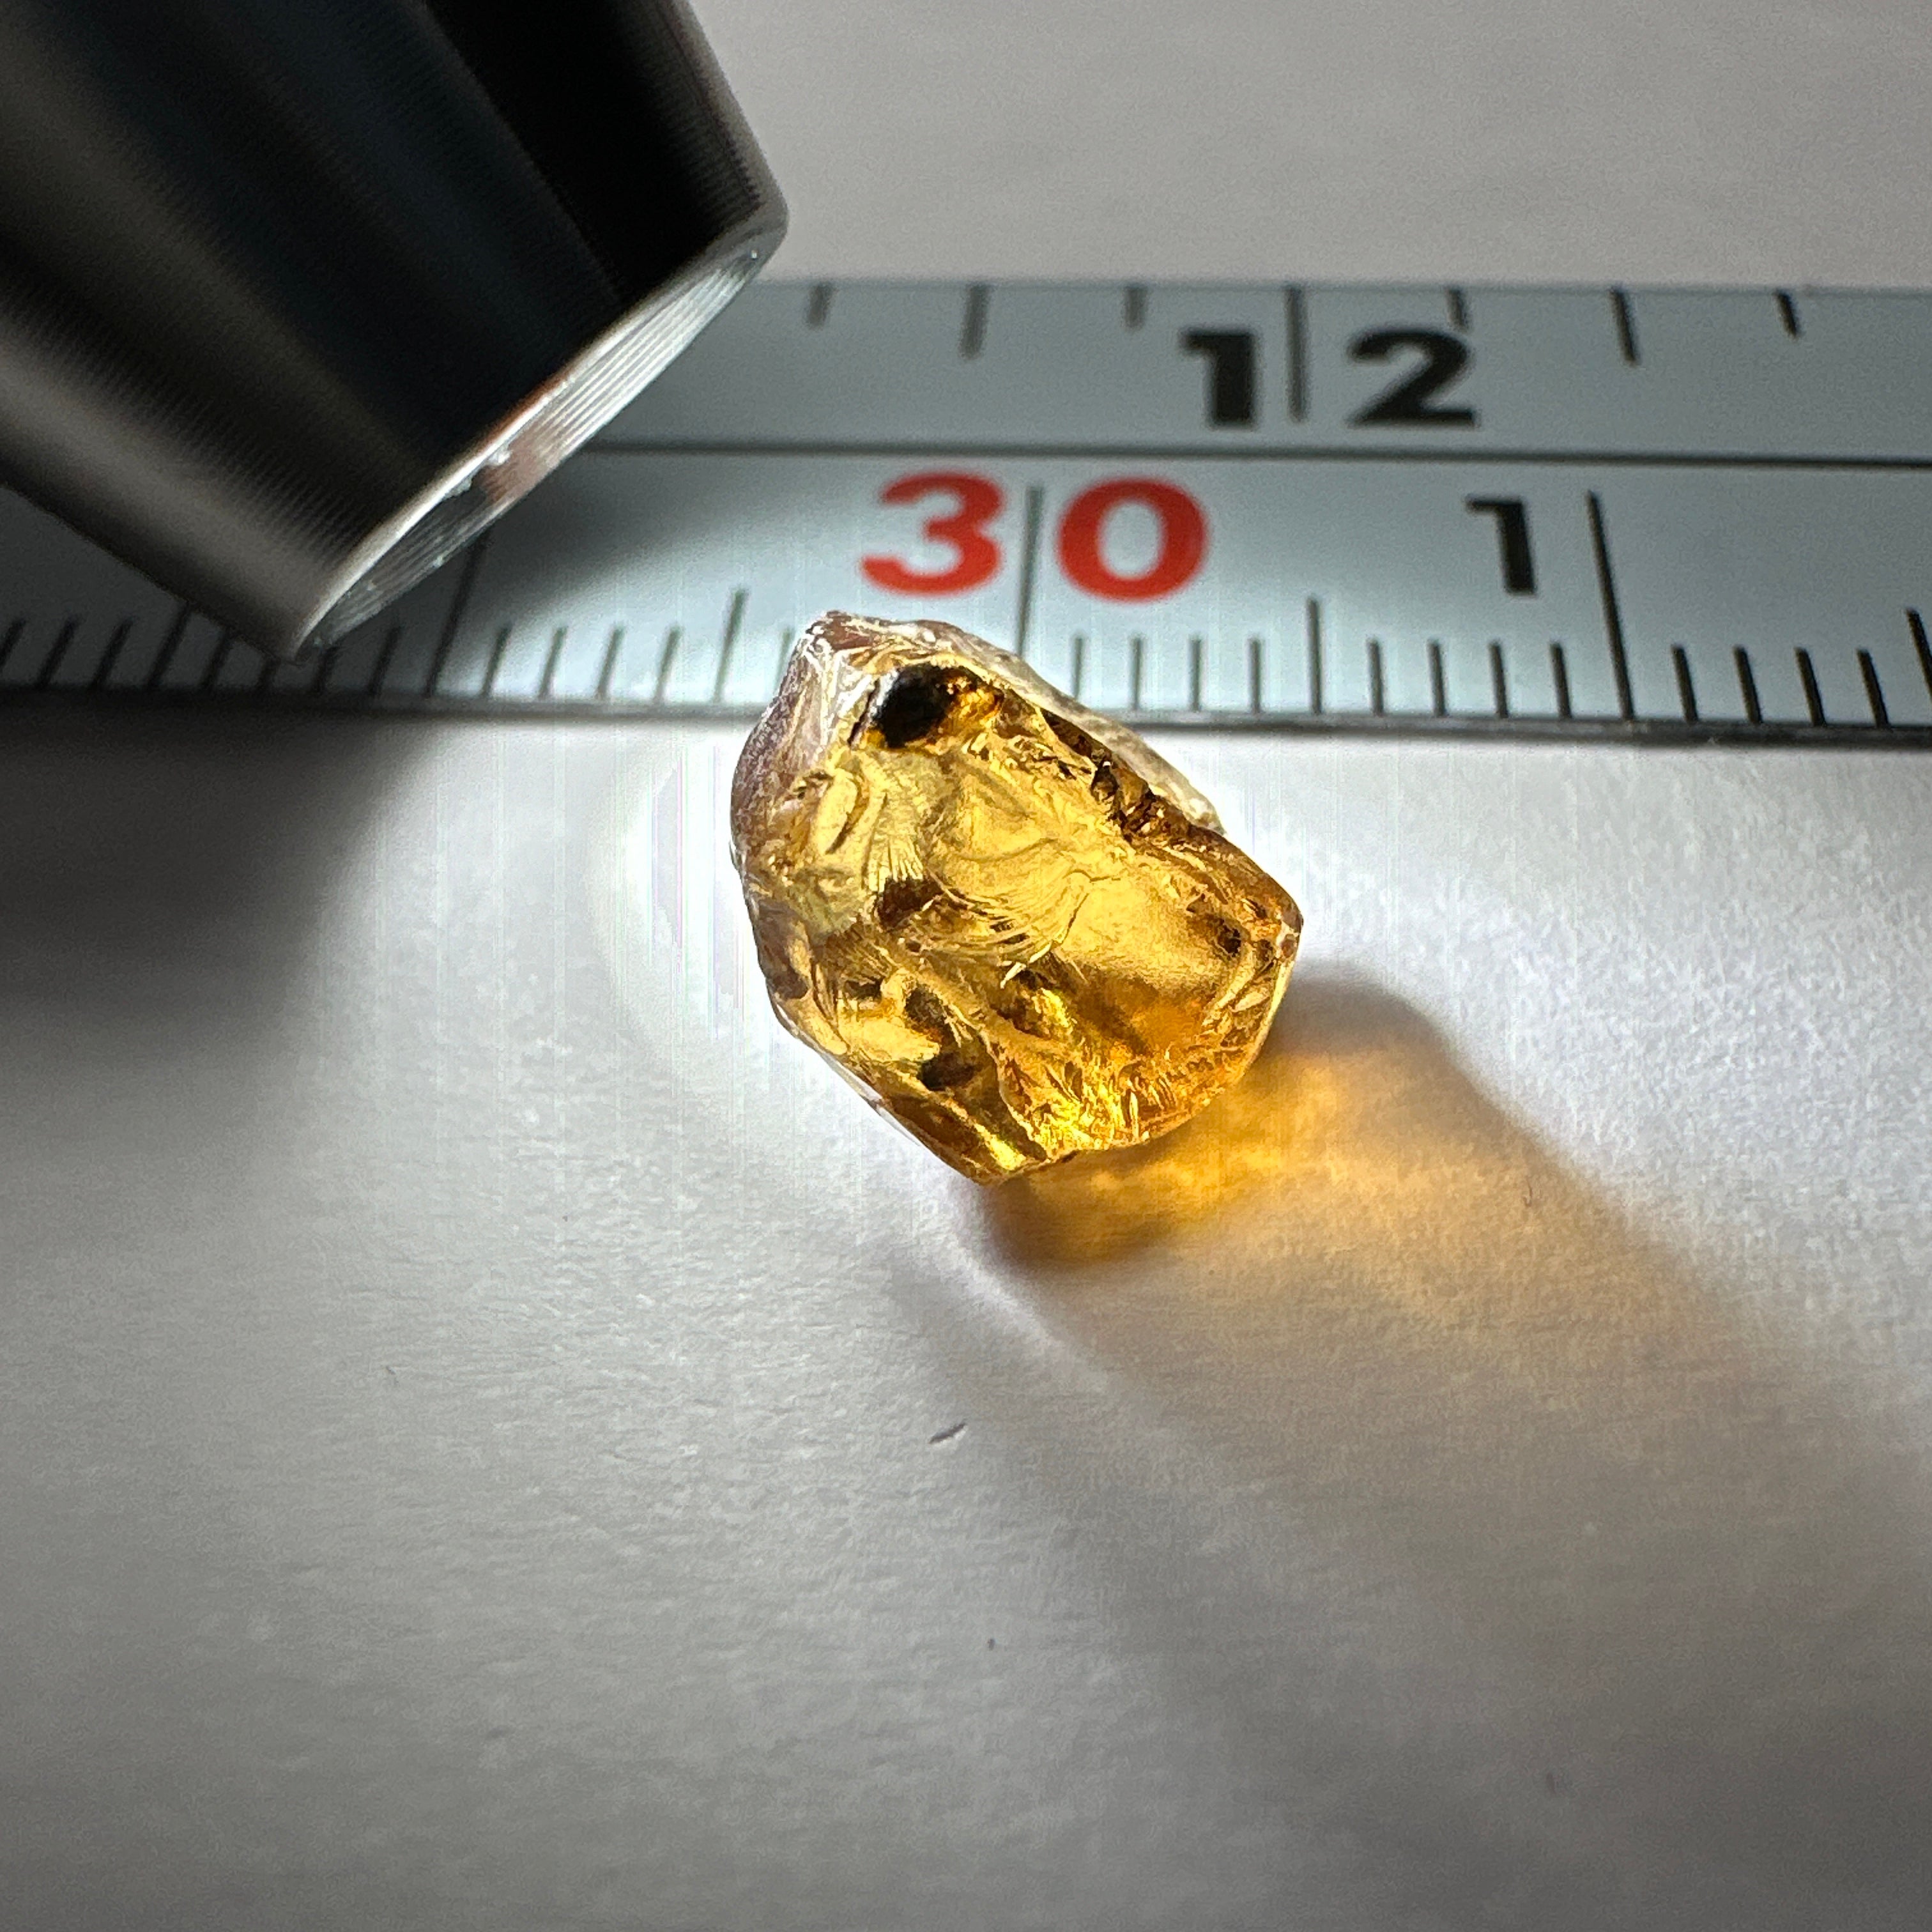 3.01ct Colour Change Garnet, Tanzania, Untreated Unheated, slight inclusion on the skin on the outside